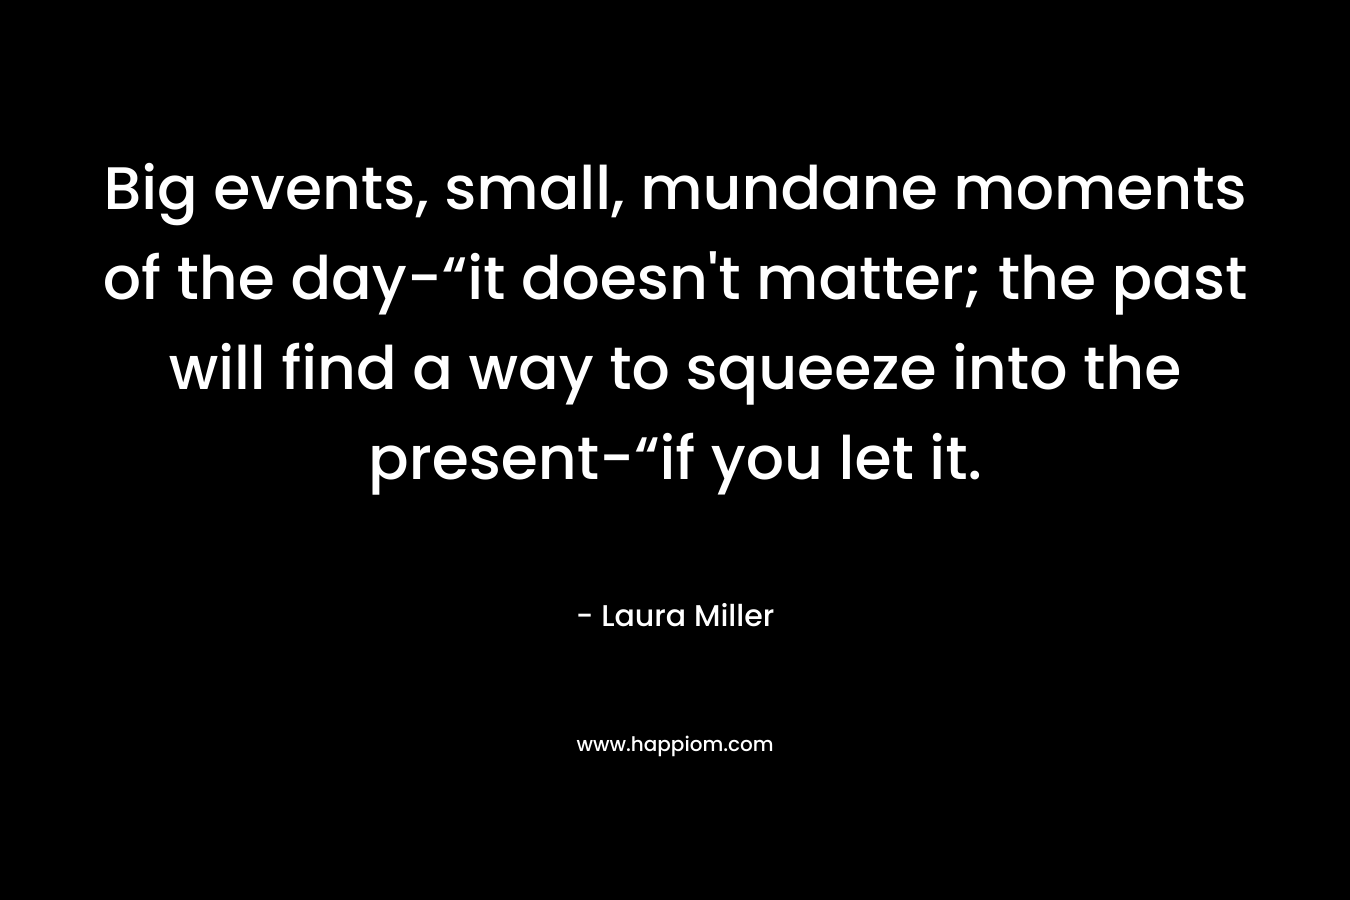 Big events, small, mundane moments of the day-“it doesn't matter; the past will find a way to squeeze into the present-“if you let it.